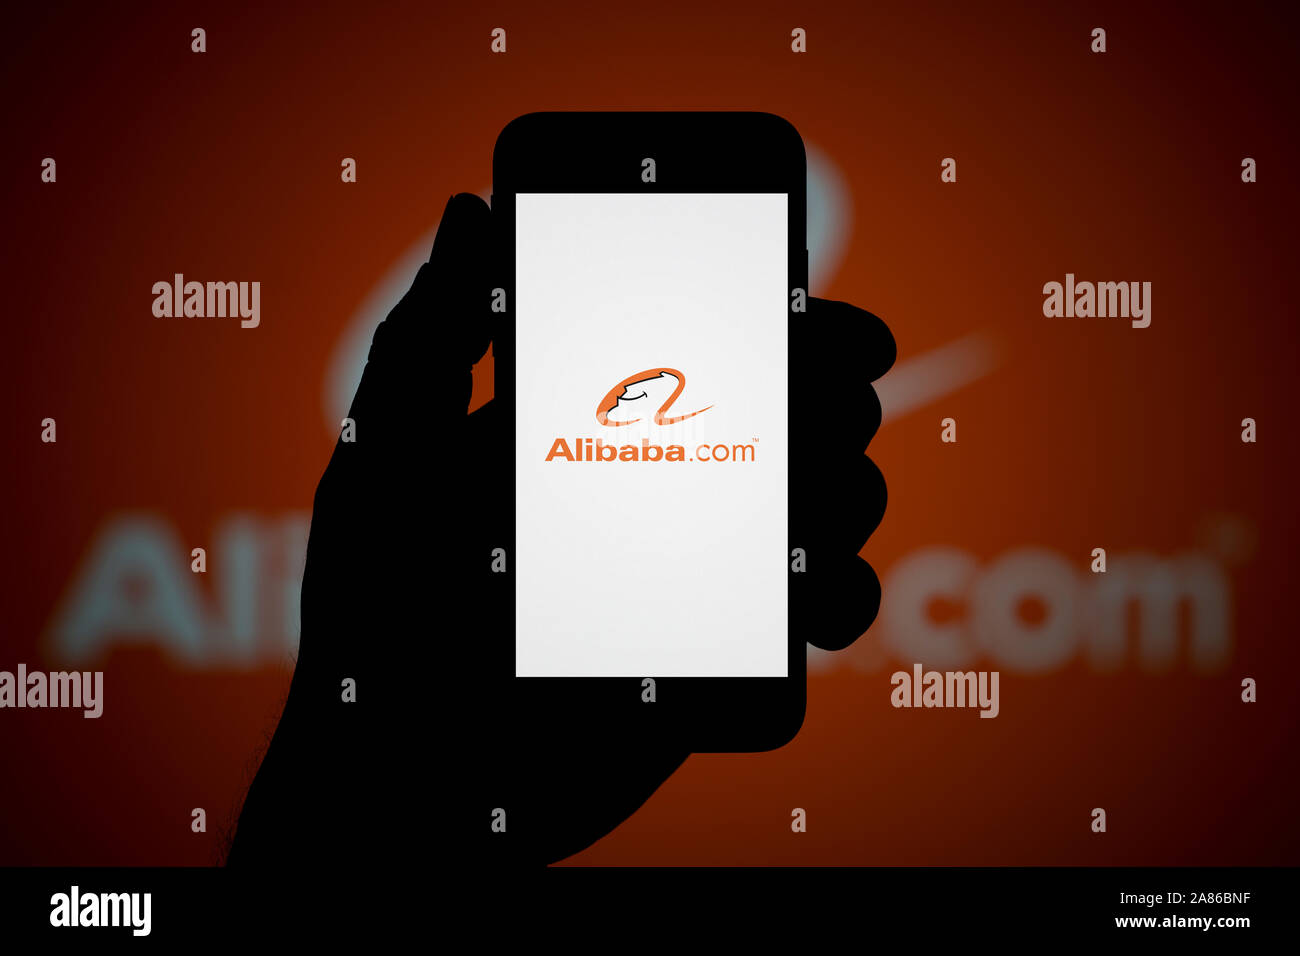 A man looks at his iPhone which displays the Alibaba logo, with the same logo in the background (Editorial use only). Stock Photo